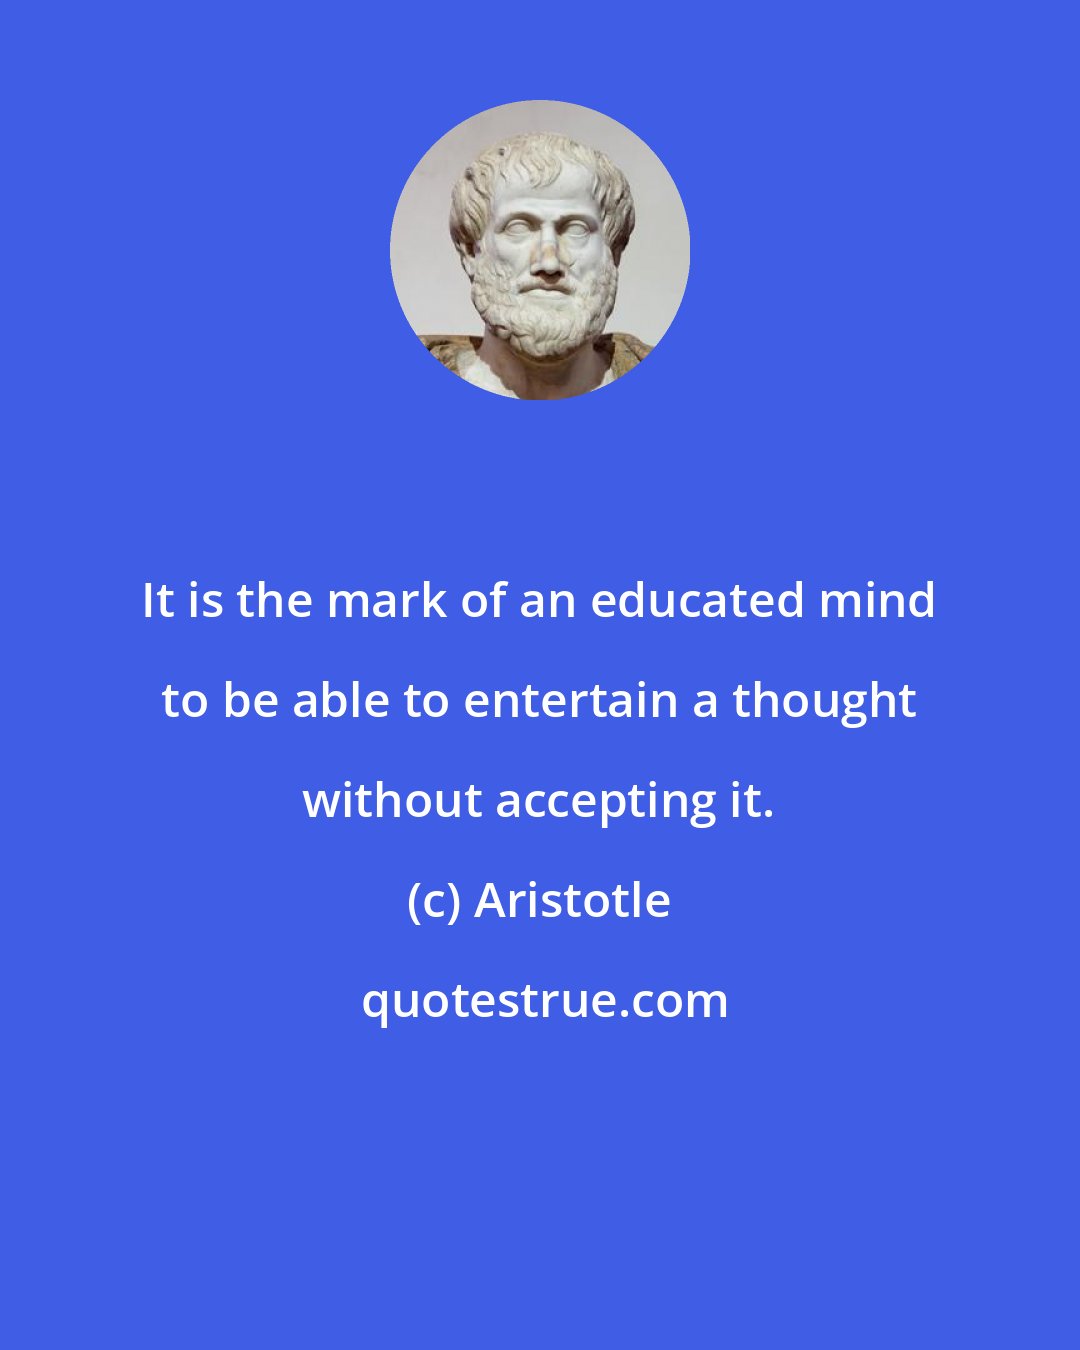 Aristotle: It is the mark of an educated mind to be able to entertain a thought without accepting it.